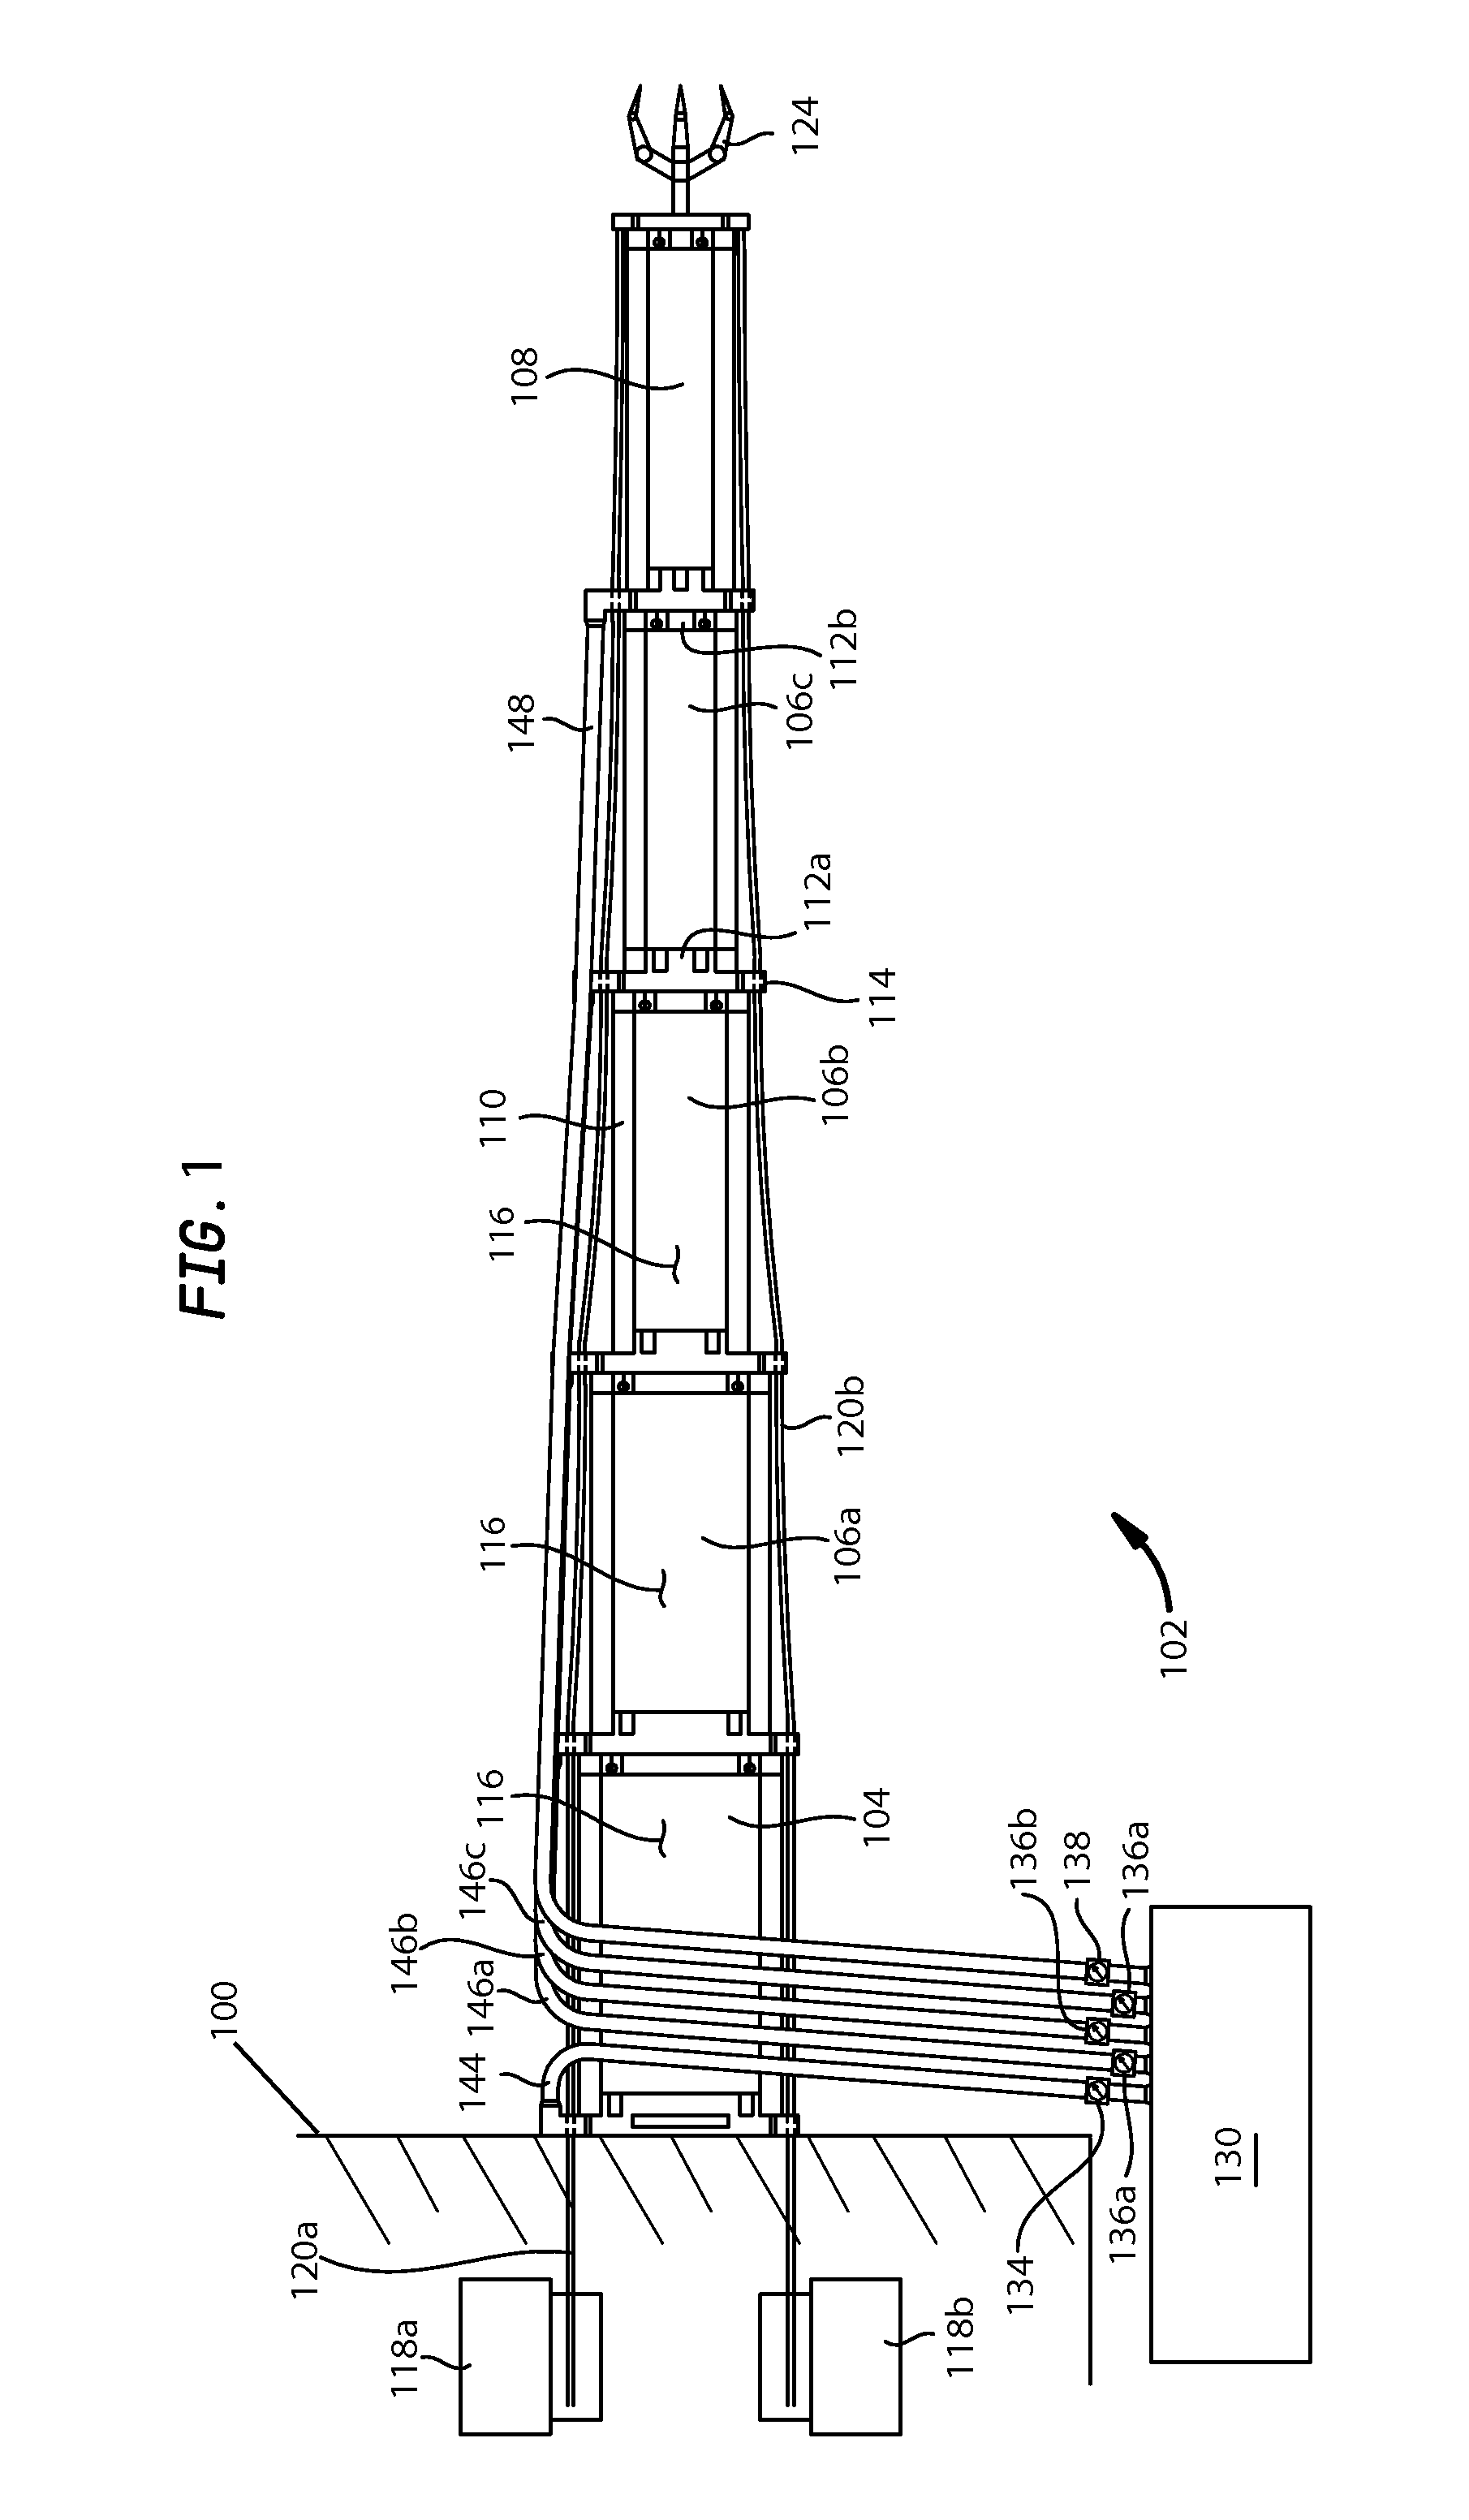 Continuum style manipulator actuated with phase change media